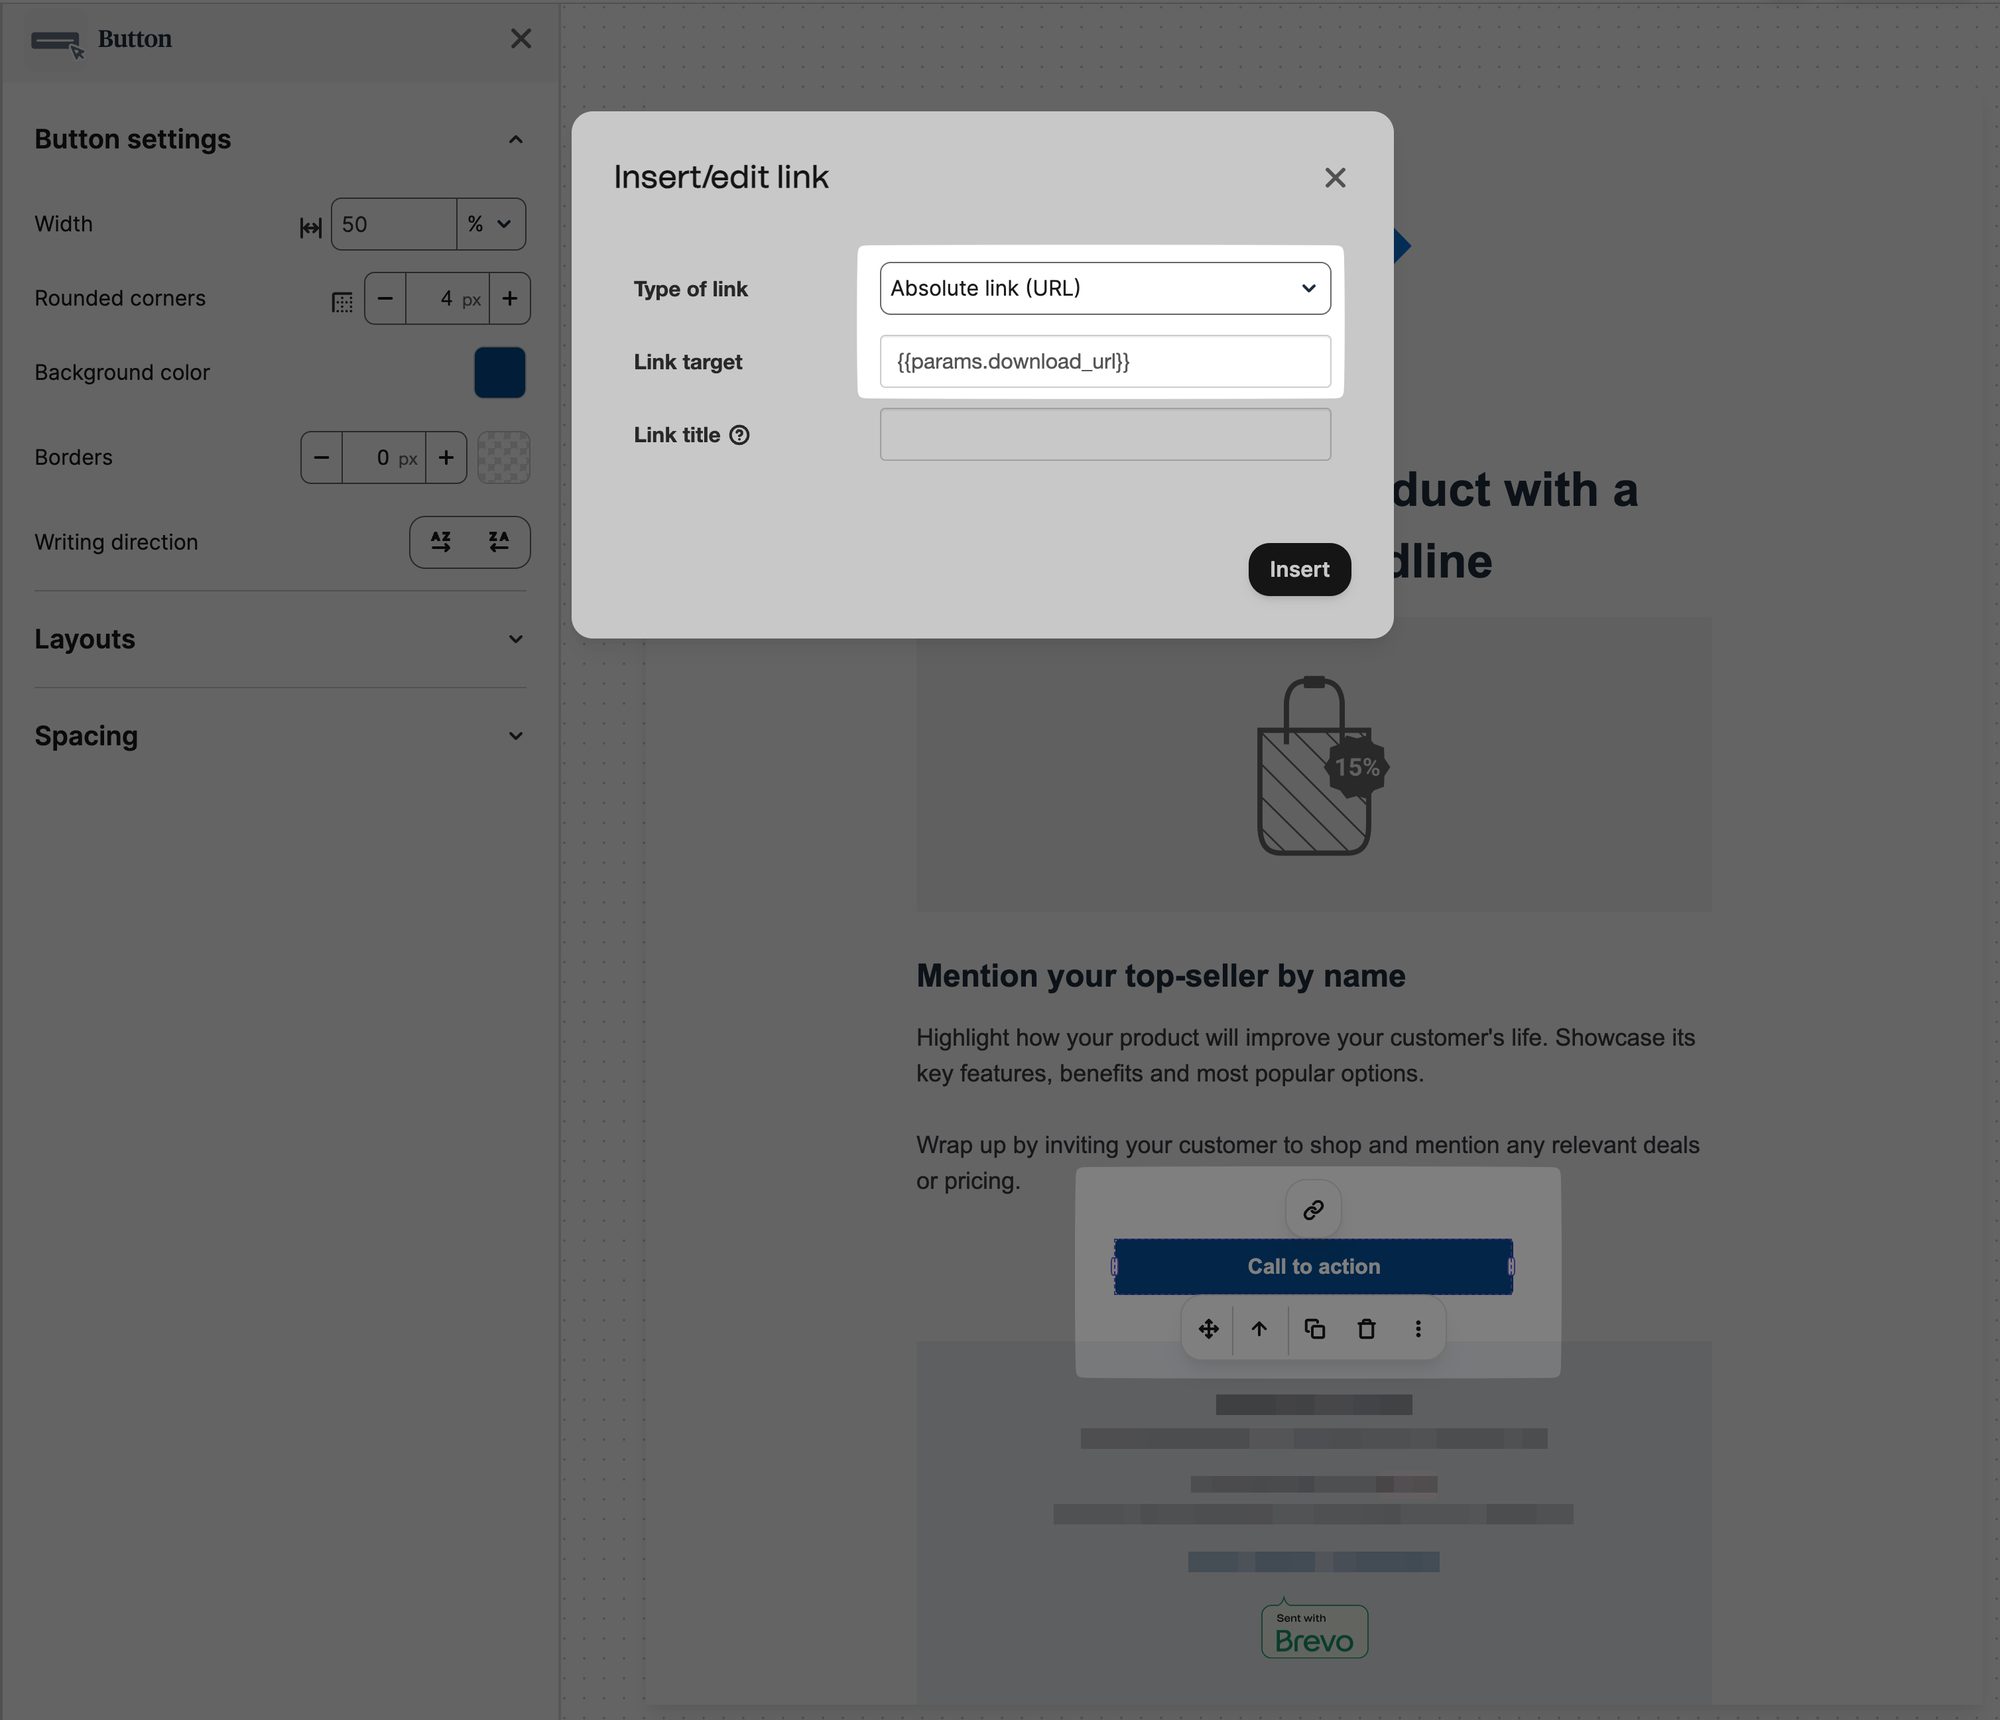 Stripe Payment Link to a file download with a confirmation email in 30 minutes